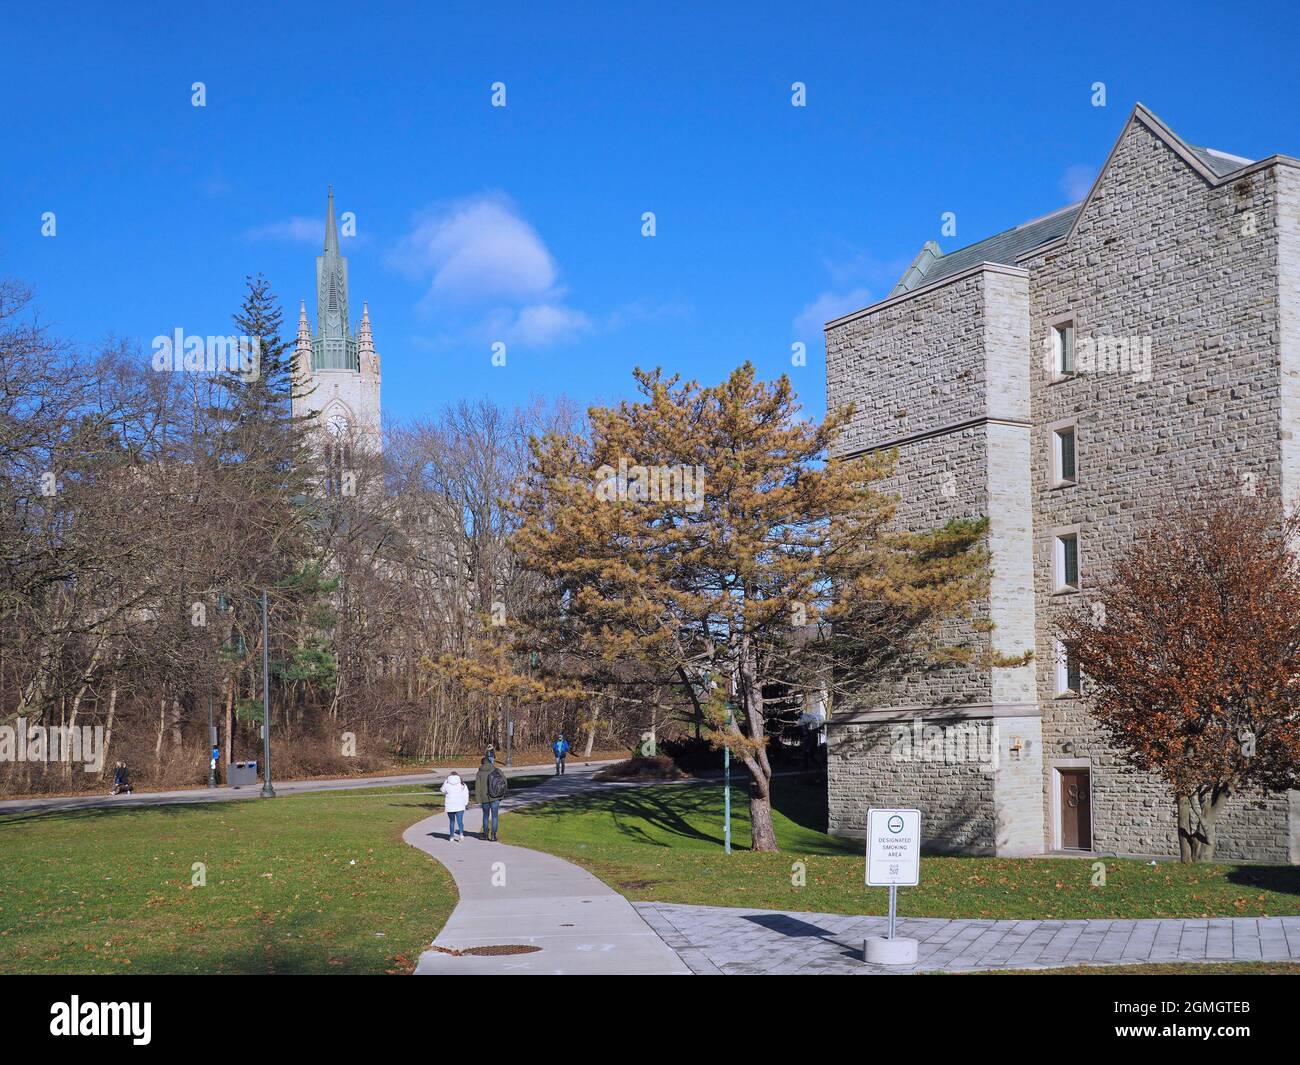 London, Ontario, Canada - December 4, 2018:  Students walking on the campus of Western University, towards the Middlesex College clock tower. Stock Photo